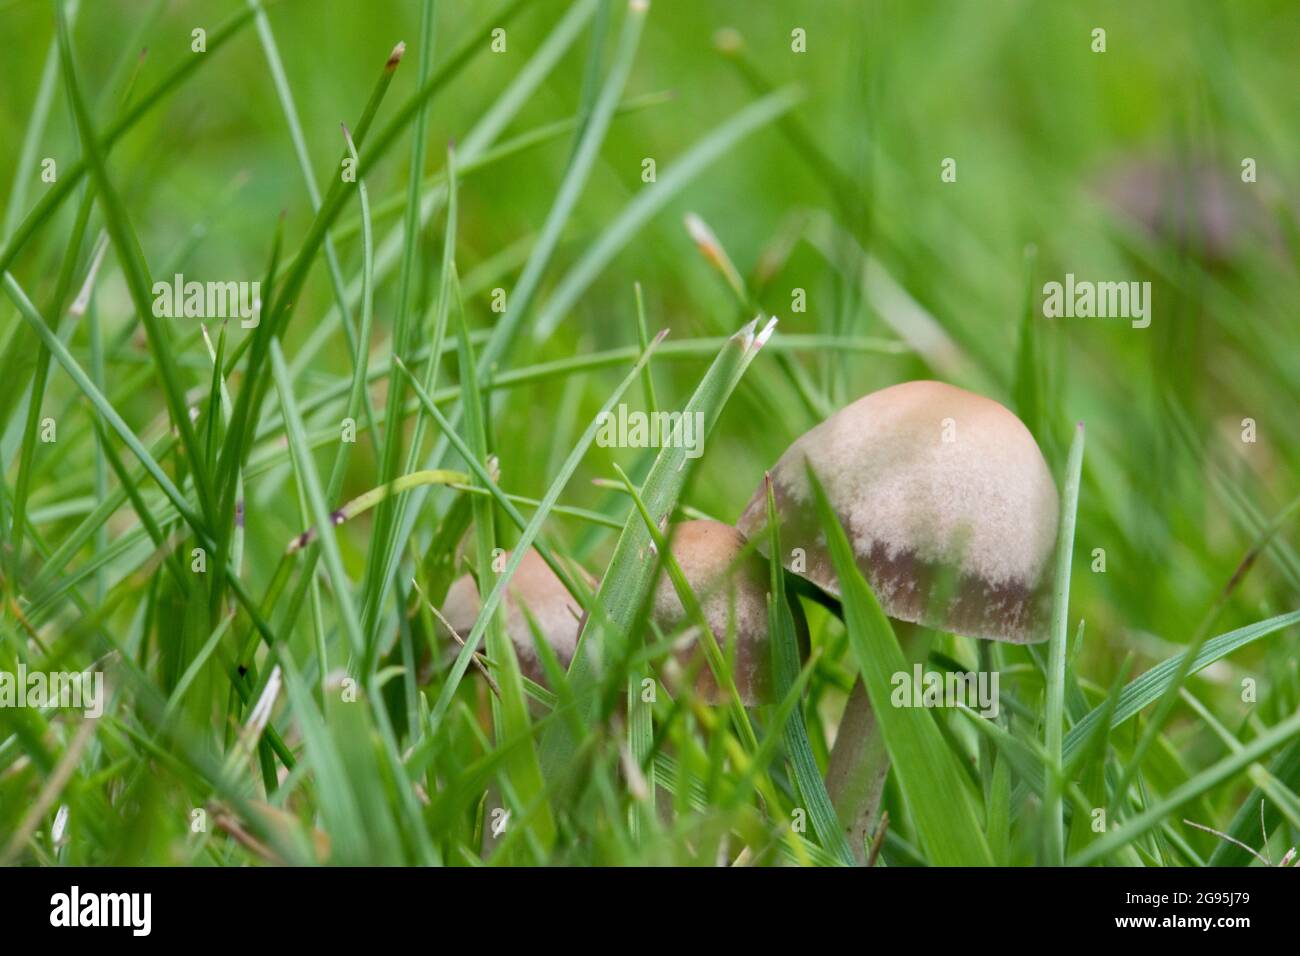 Panaeolina foenisecii (Maire - Brown Mottlegill or Lawn Mower's Mushroom or the Haymaker). in a lawn in a garden in England, United Kingdom. A common Stock Photo